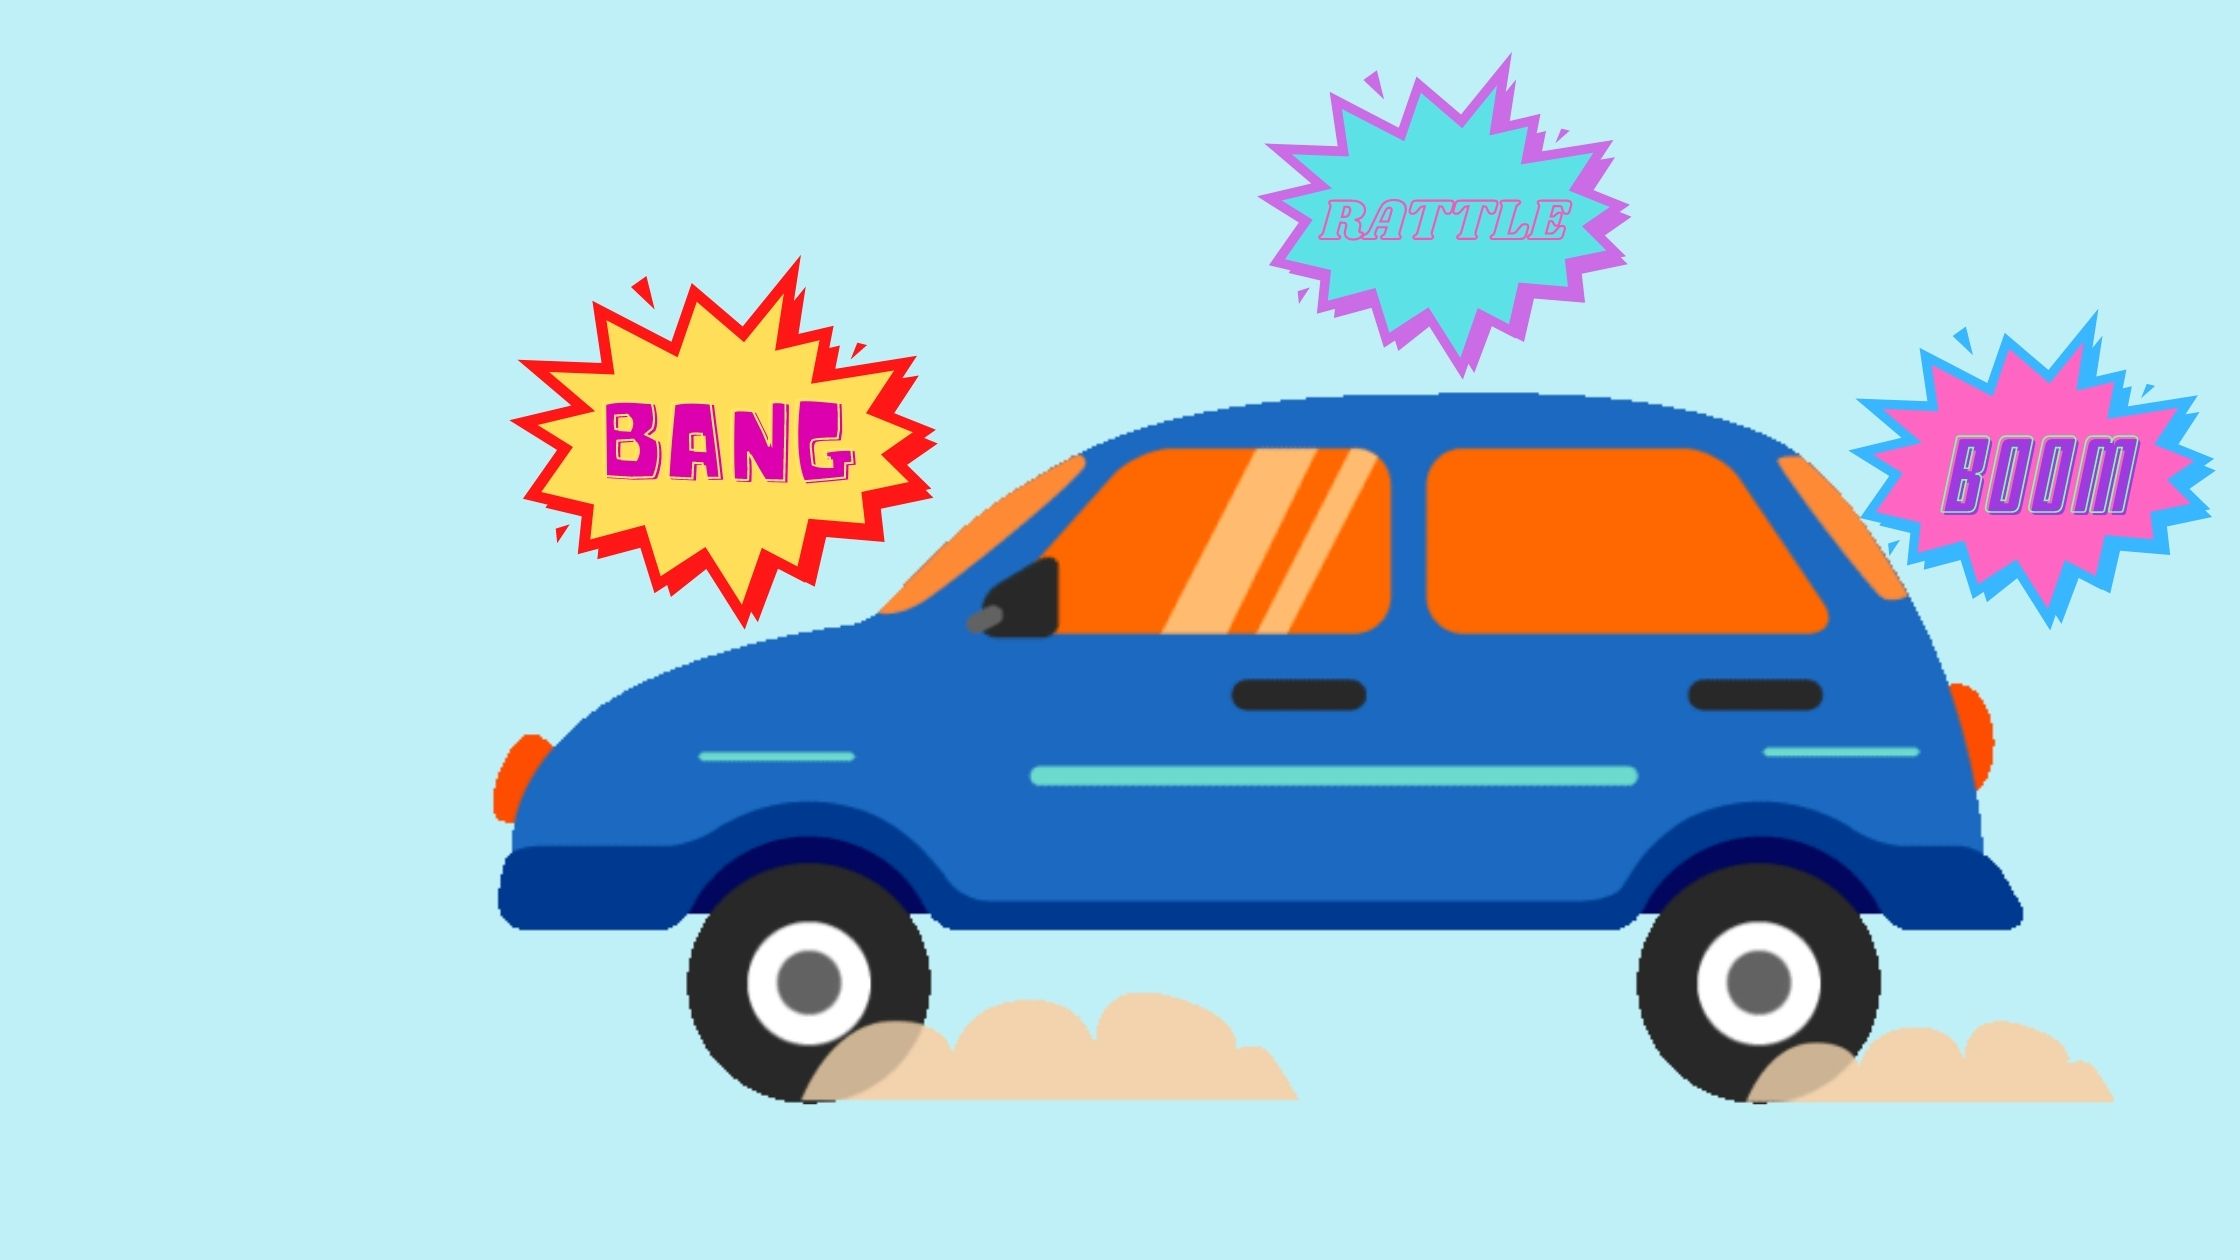 Car Making Whining Noise: 8 Potential Causes